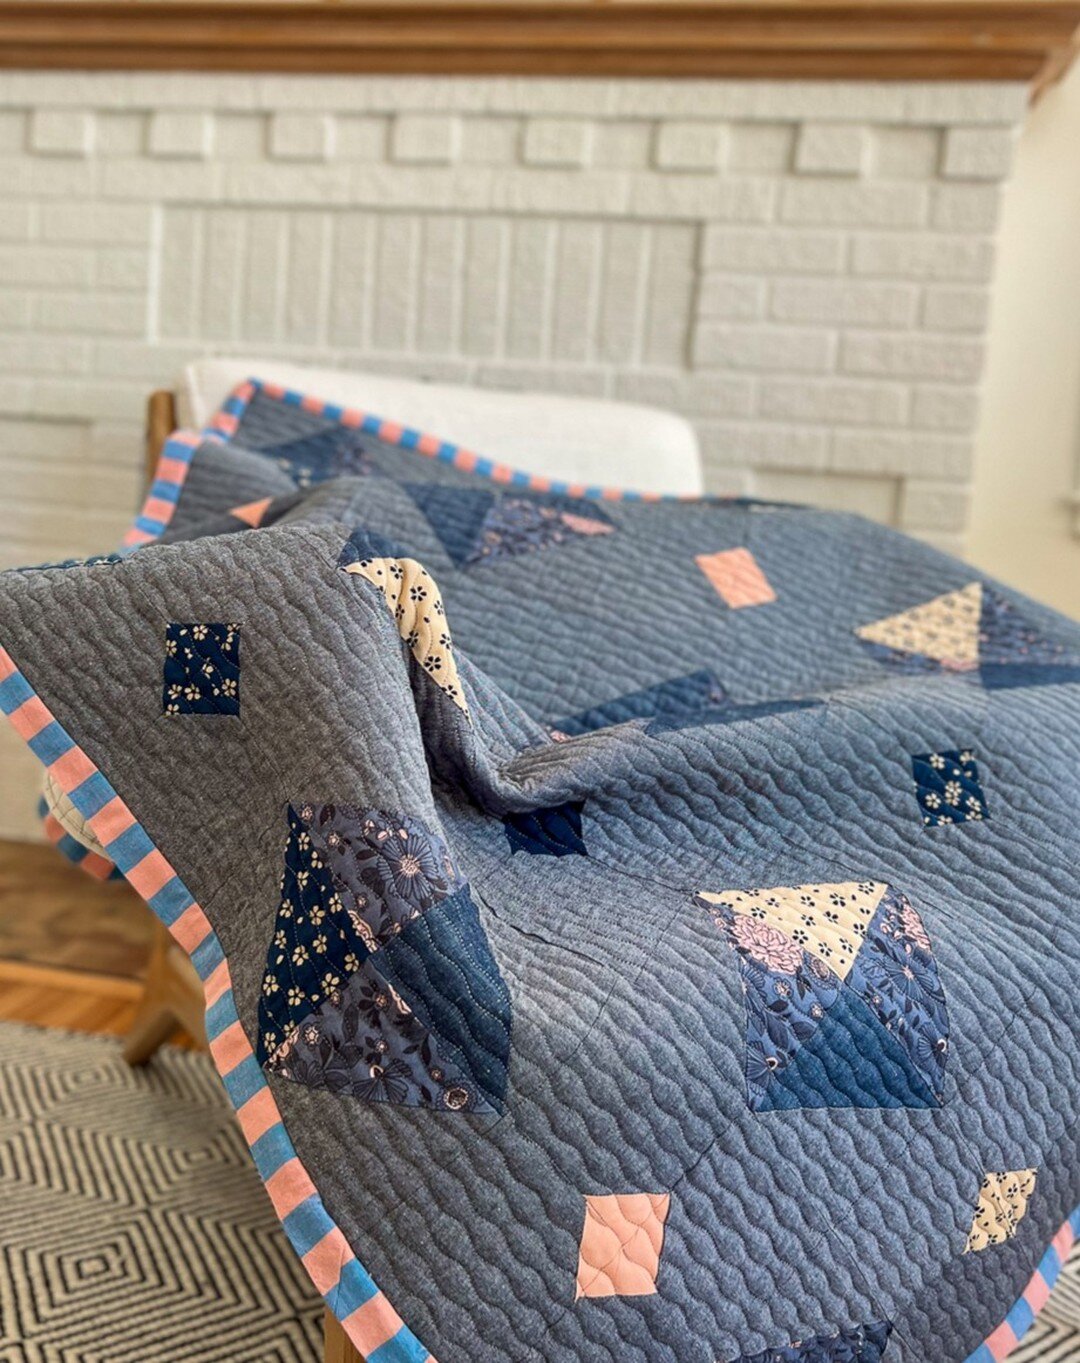 Baby quilts will always be the very best reason to make a quilt. 🩷
Maker: @knittingandicecream
Pattern: I don&rsquo;t know
Panto: Frill by @627handworks

#modernbaby #Beb&eacute; #modernbabyquilt #quilting #modernquilt #tekstilcrave